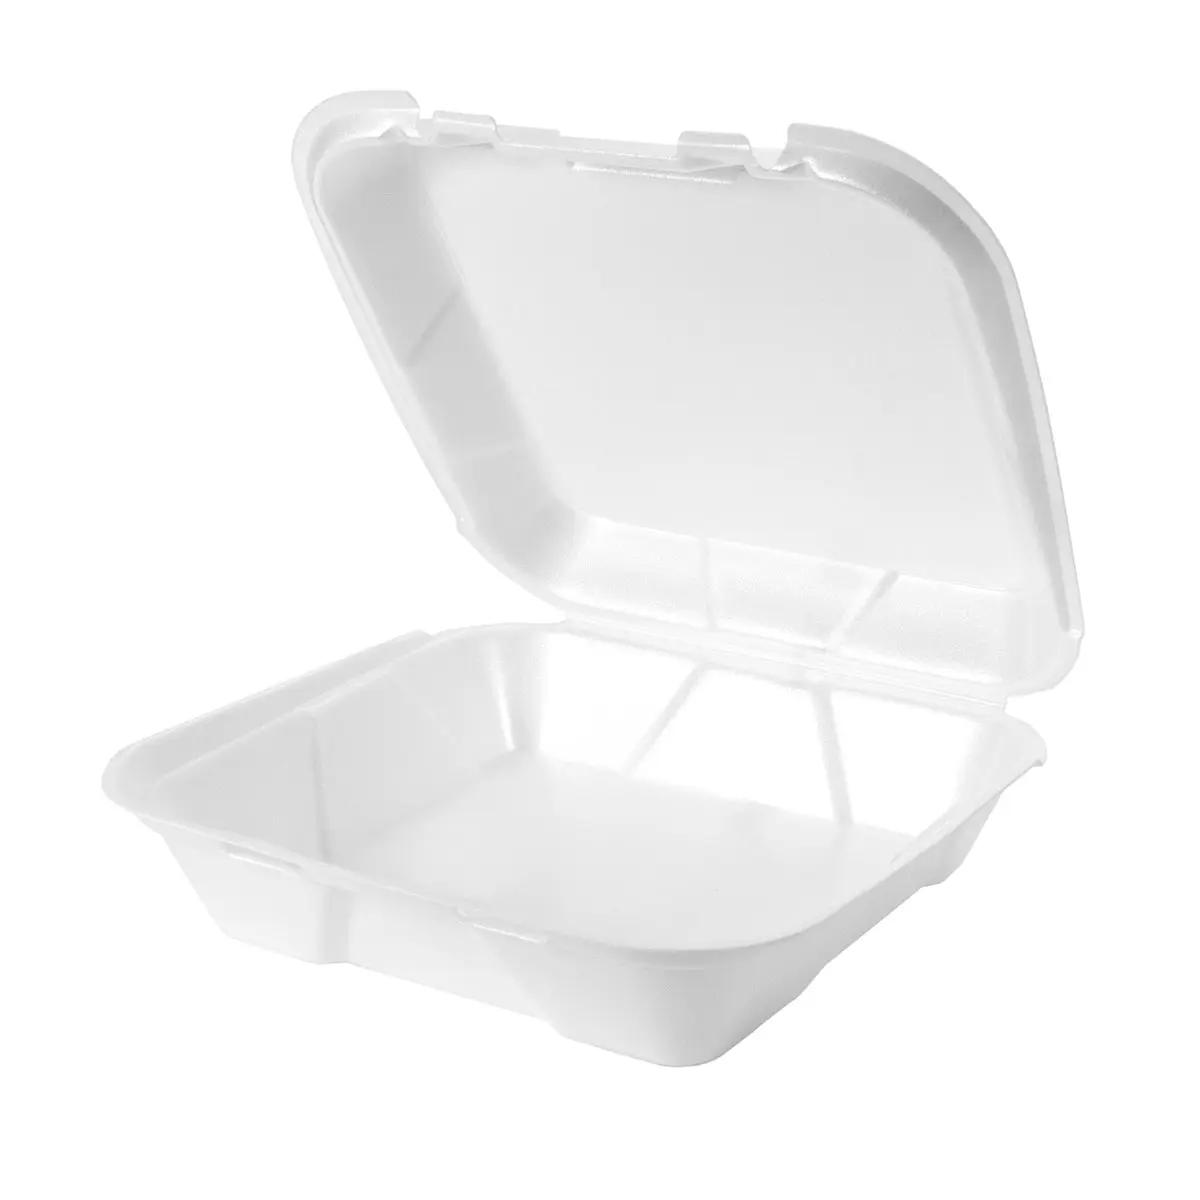 TAKE-OUT/ Container Large, 3 Comp, White 200/cs-Food Service